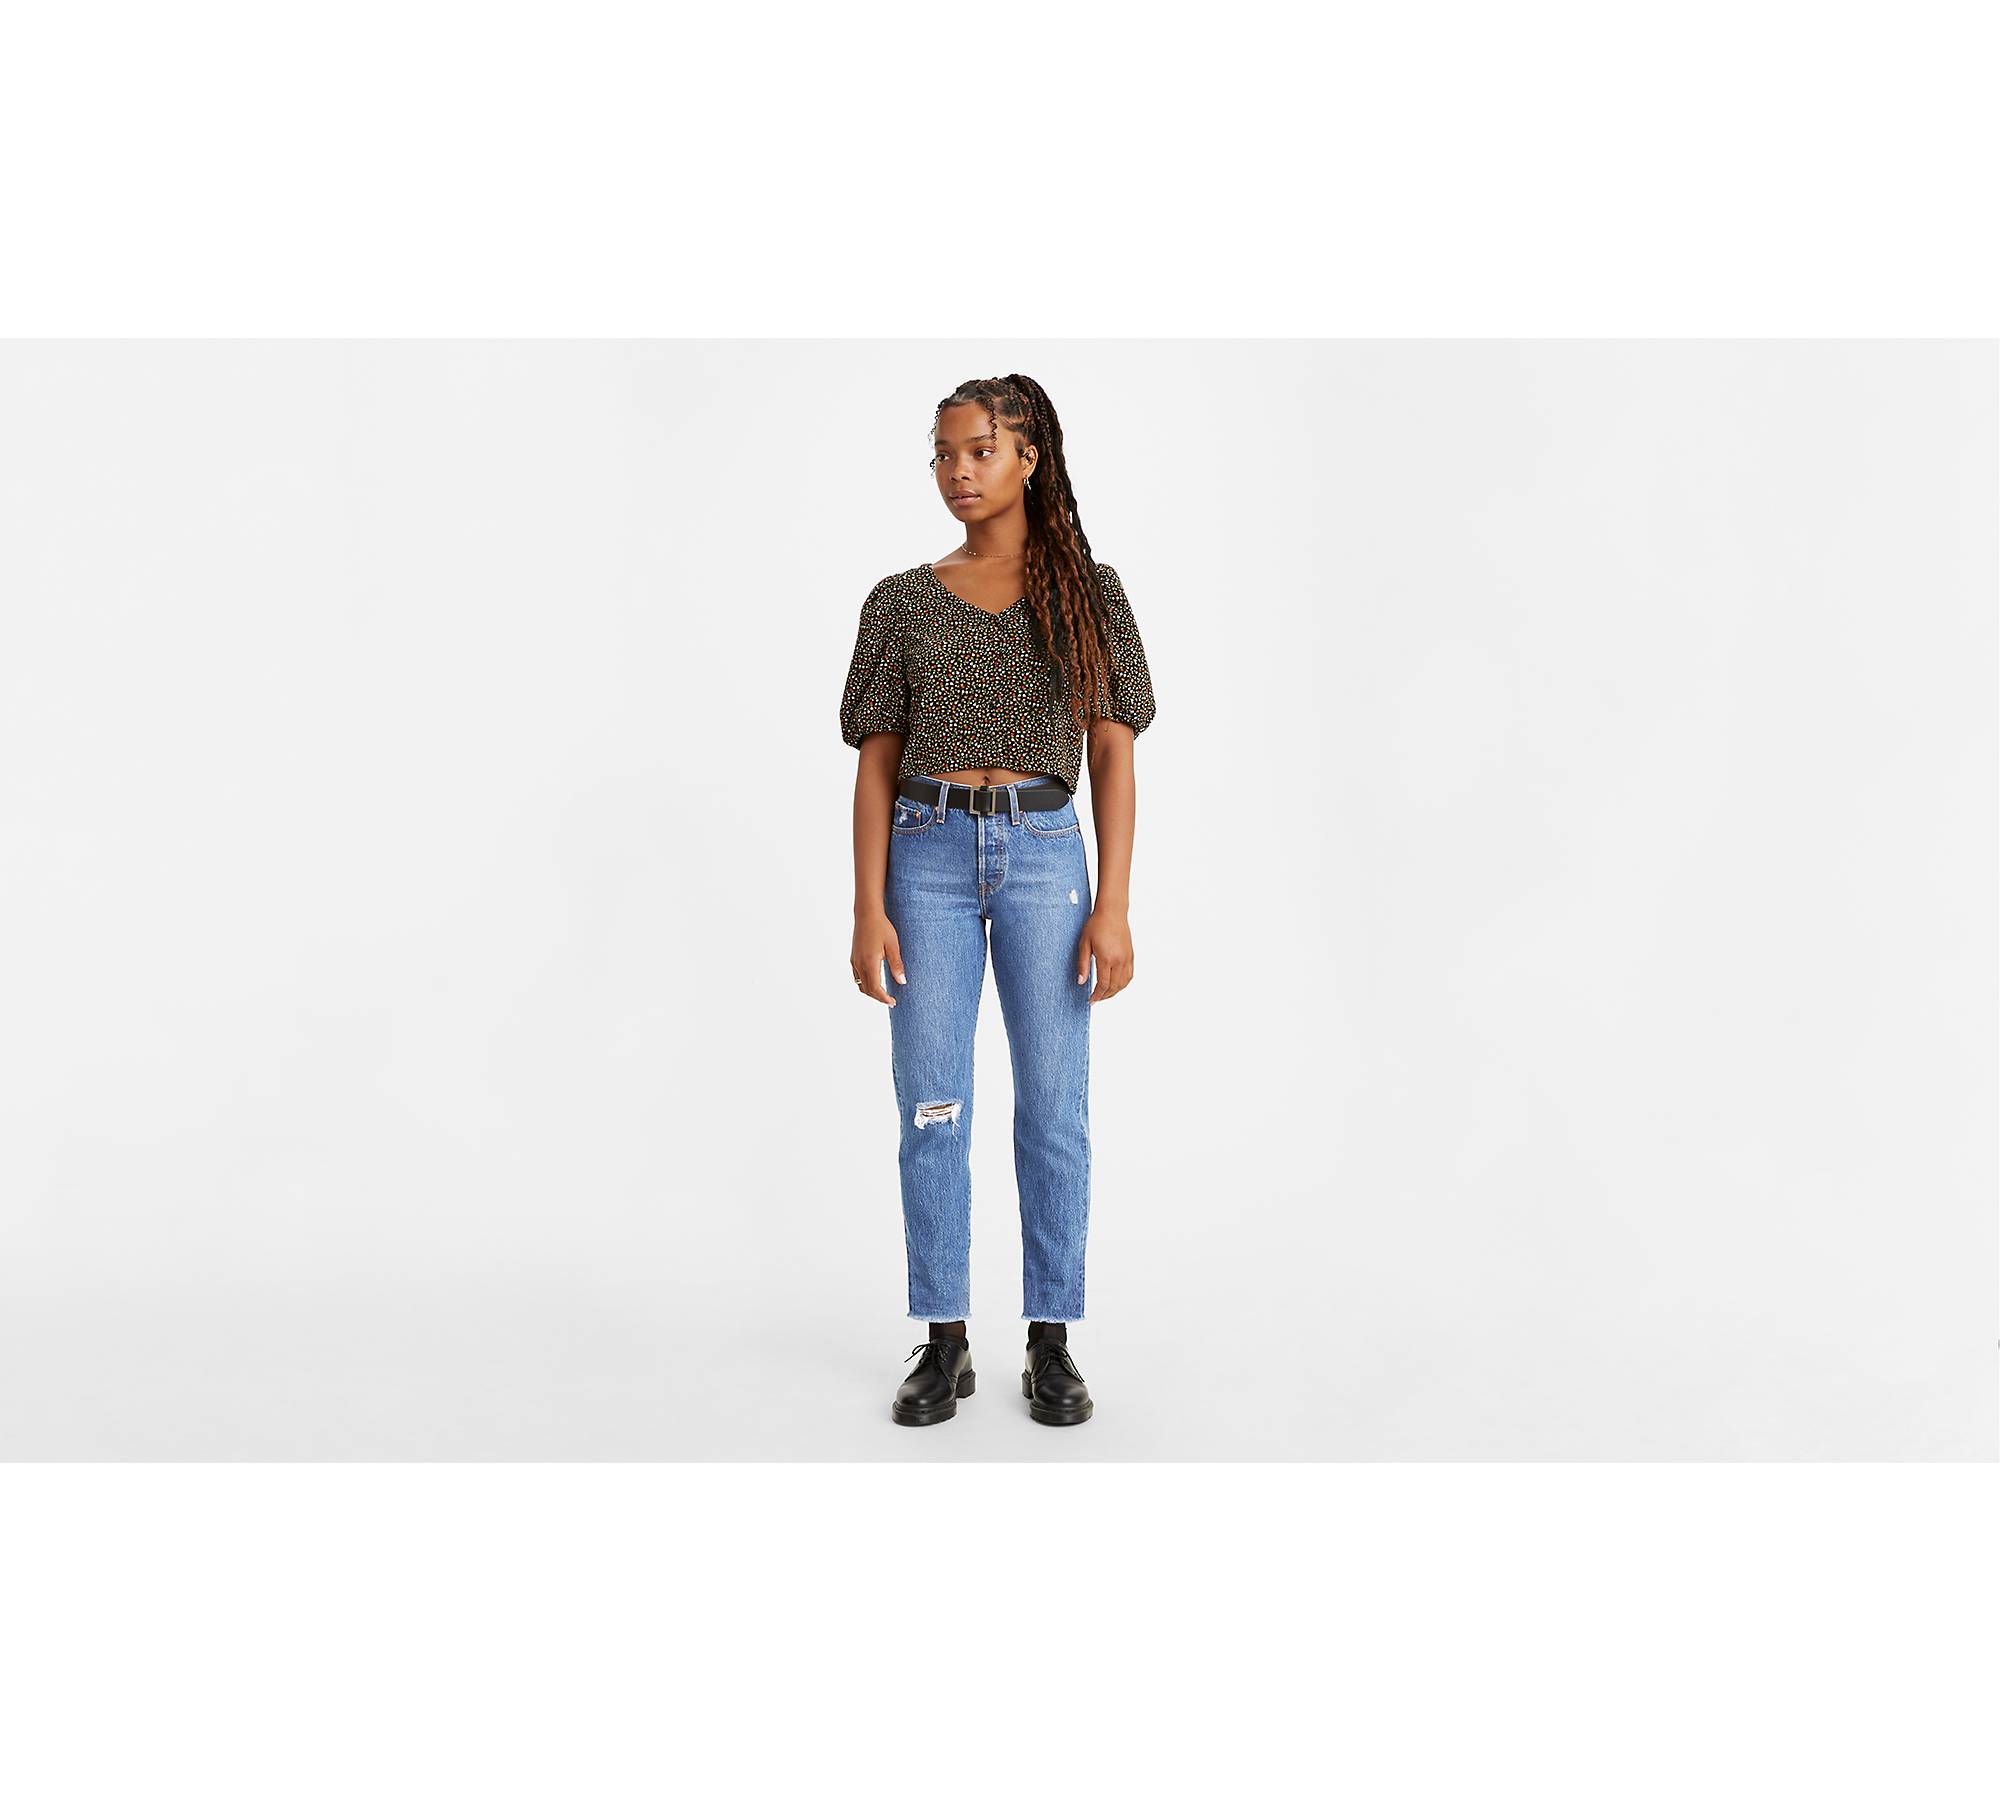 Wedgie Icon Fit Ankle Women's Jeans - Medium Wash | Levi's® CA